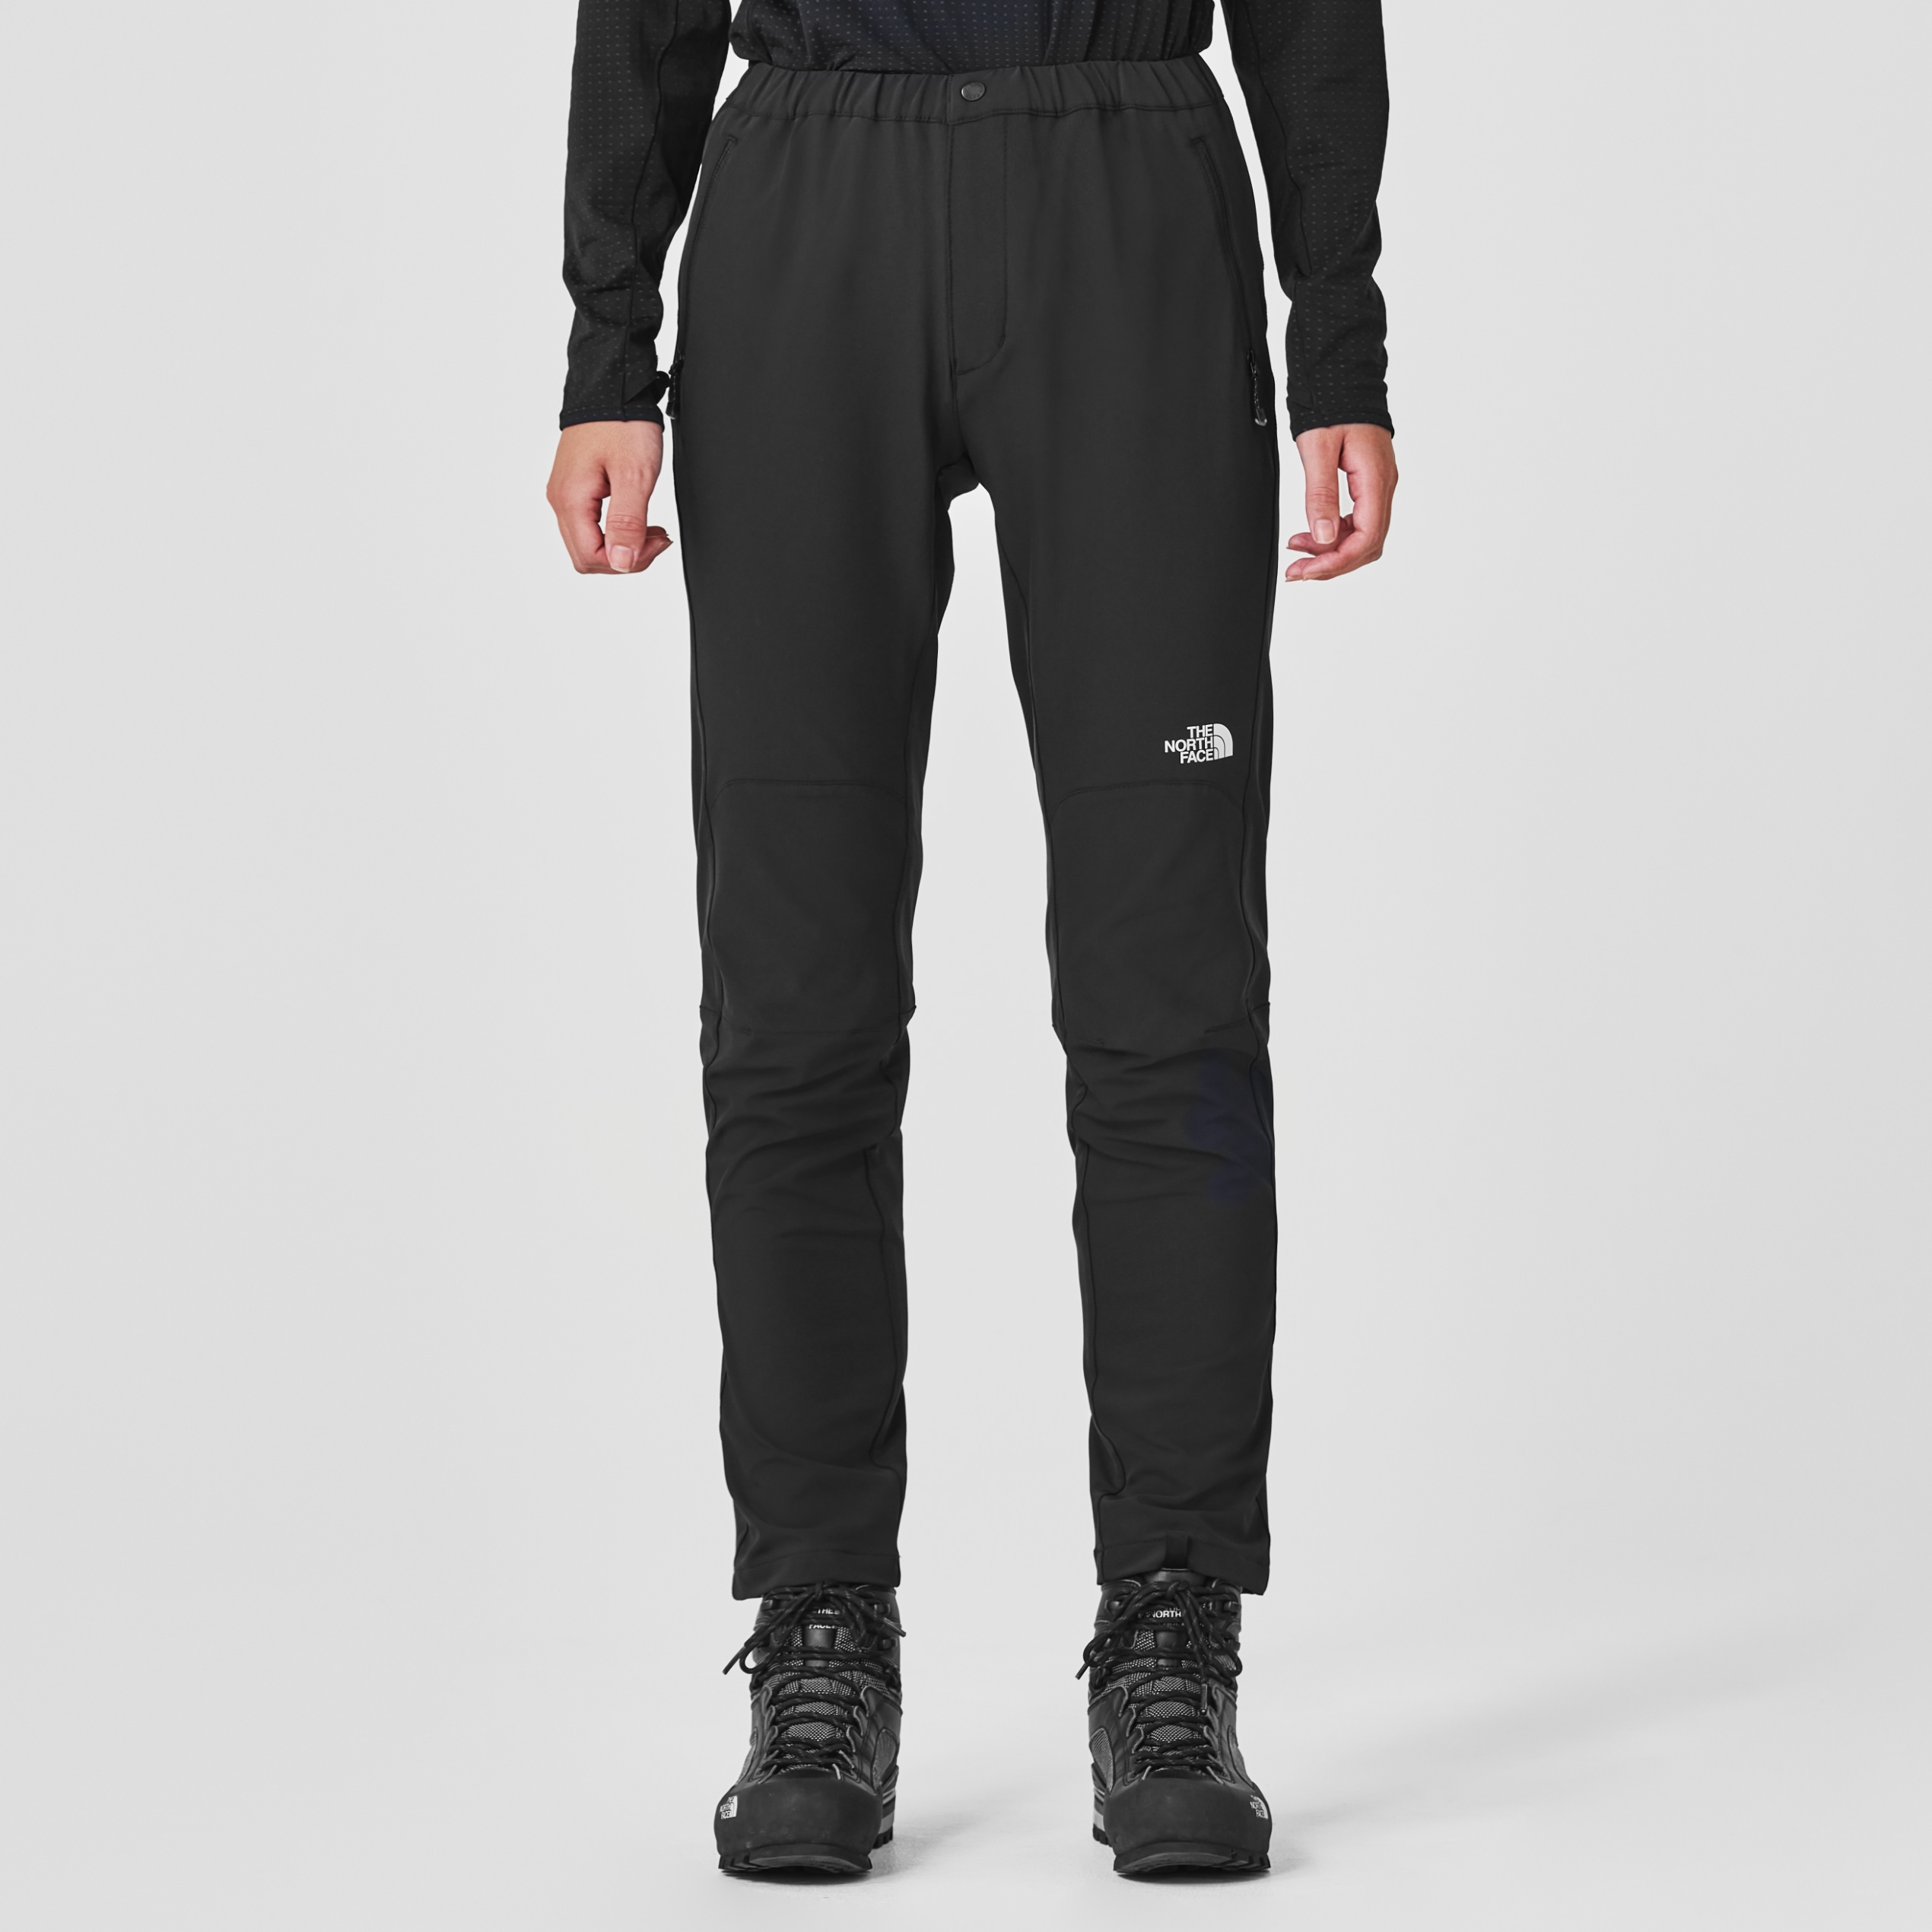 ALPINE LIGHT PANT (NBW32301) - THE NORTH FACE MOUNTAIN